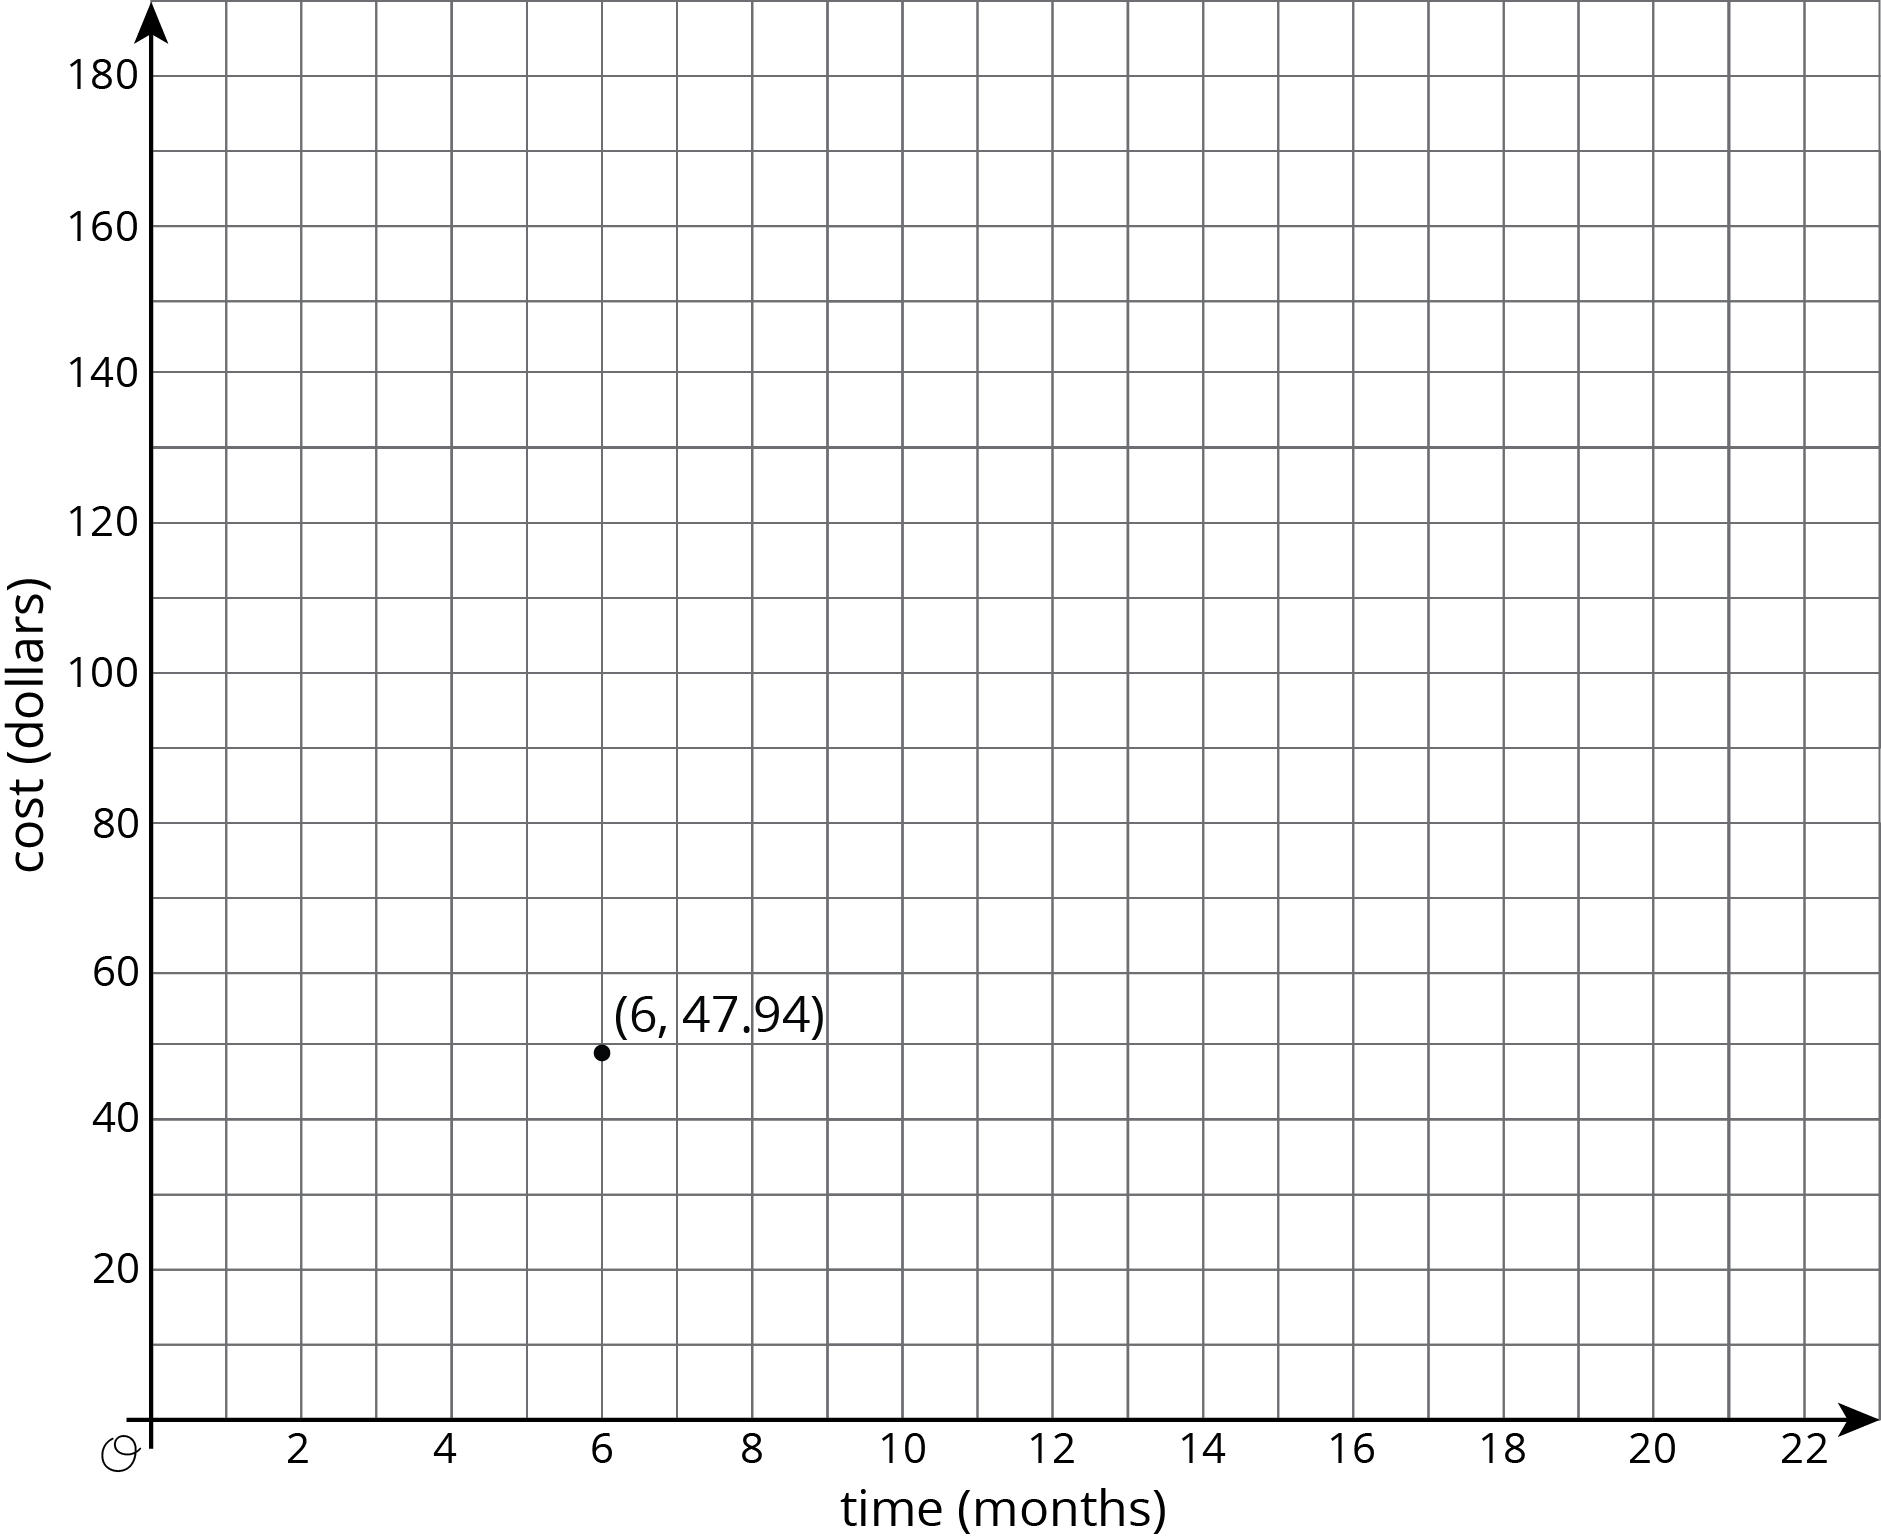 A coordinate plane with the origin labeled “O”. The horizontal axis is labeled “time in months” and the numbers 0 through 22 are indicated. The vertical axis is labeled “cost in dollars” and the numbers 0 through 180, in increments of 10, are indicated. The point with coordinates 6 comma 47.94 is indicated.